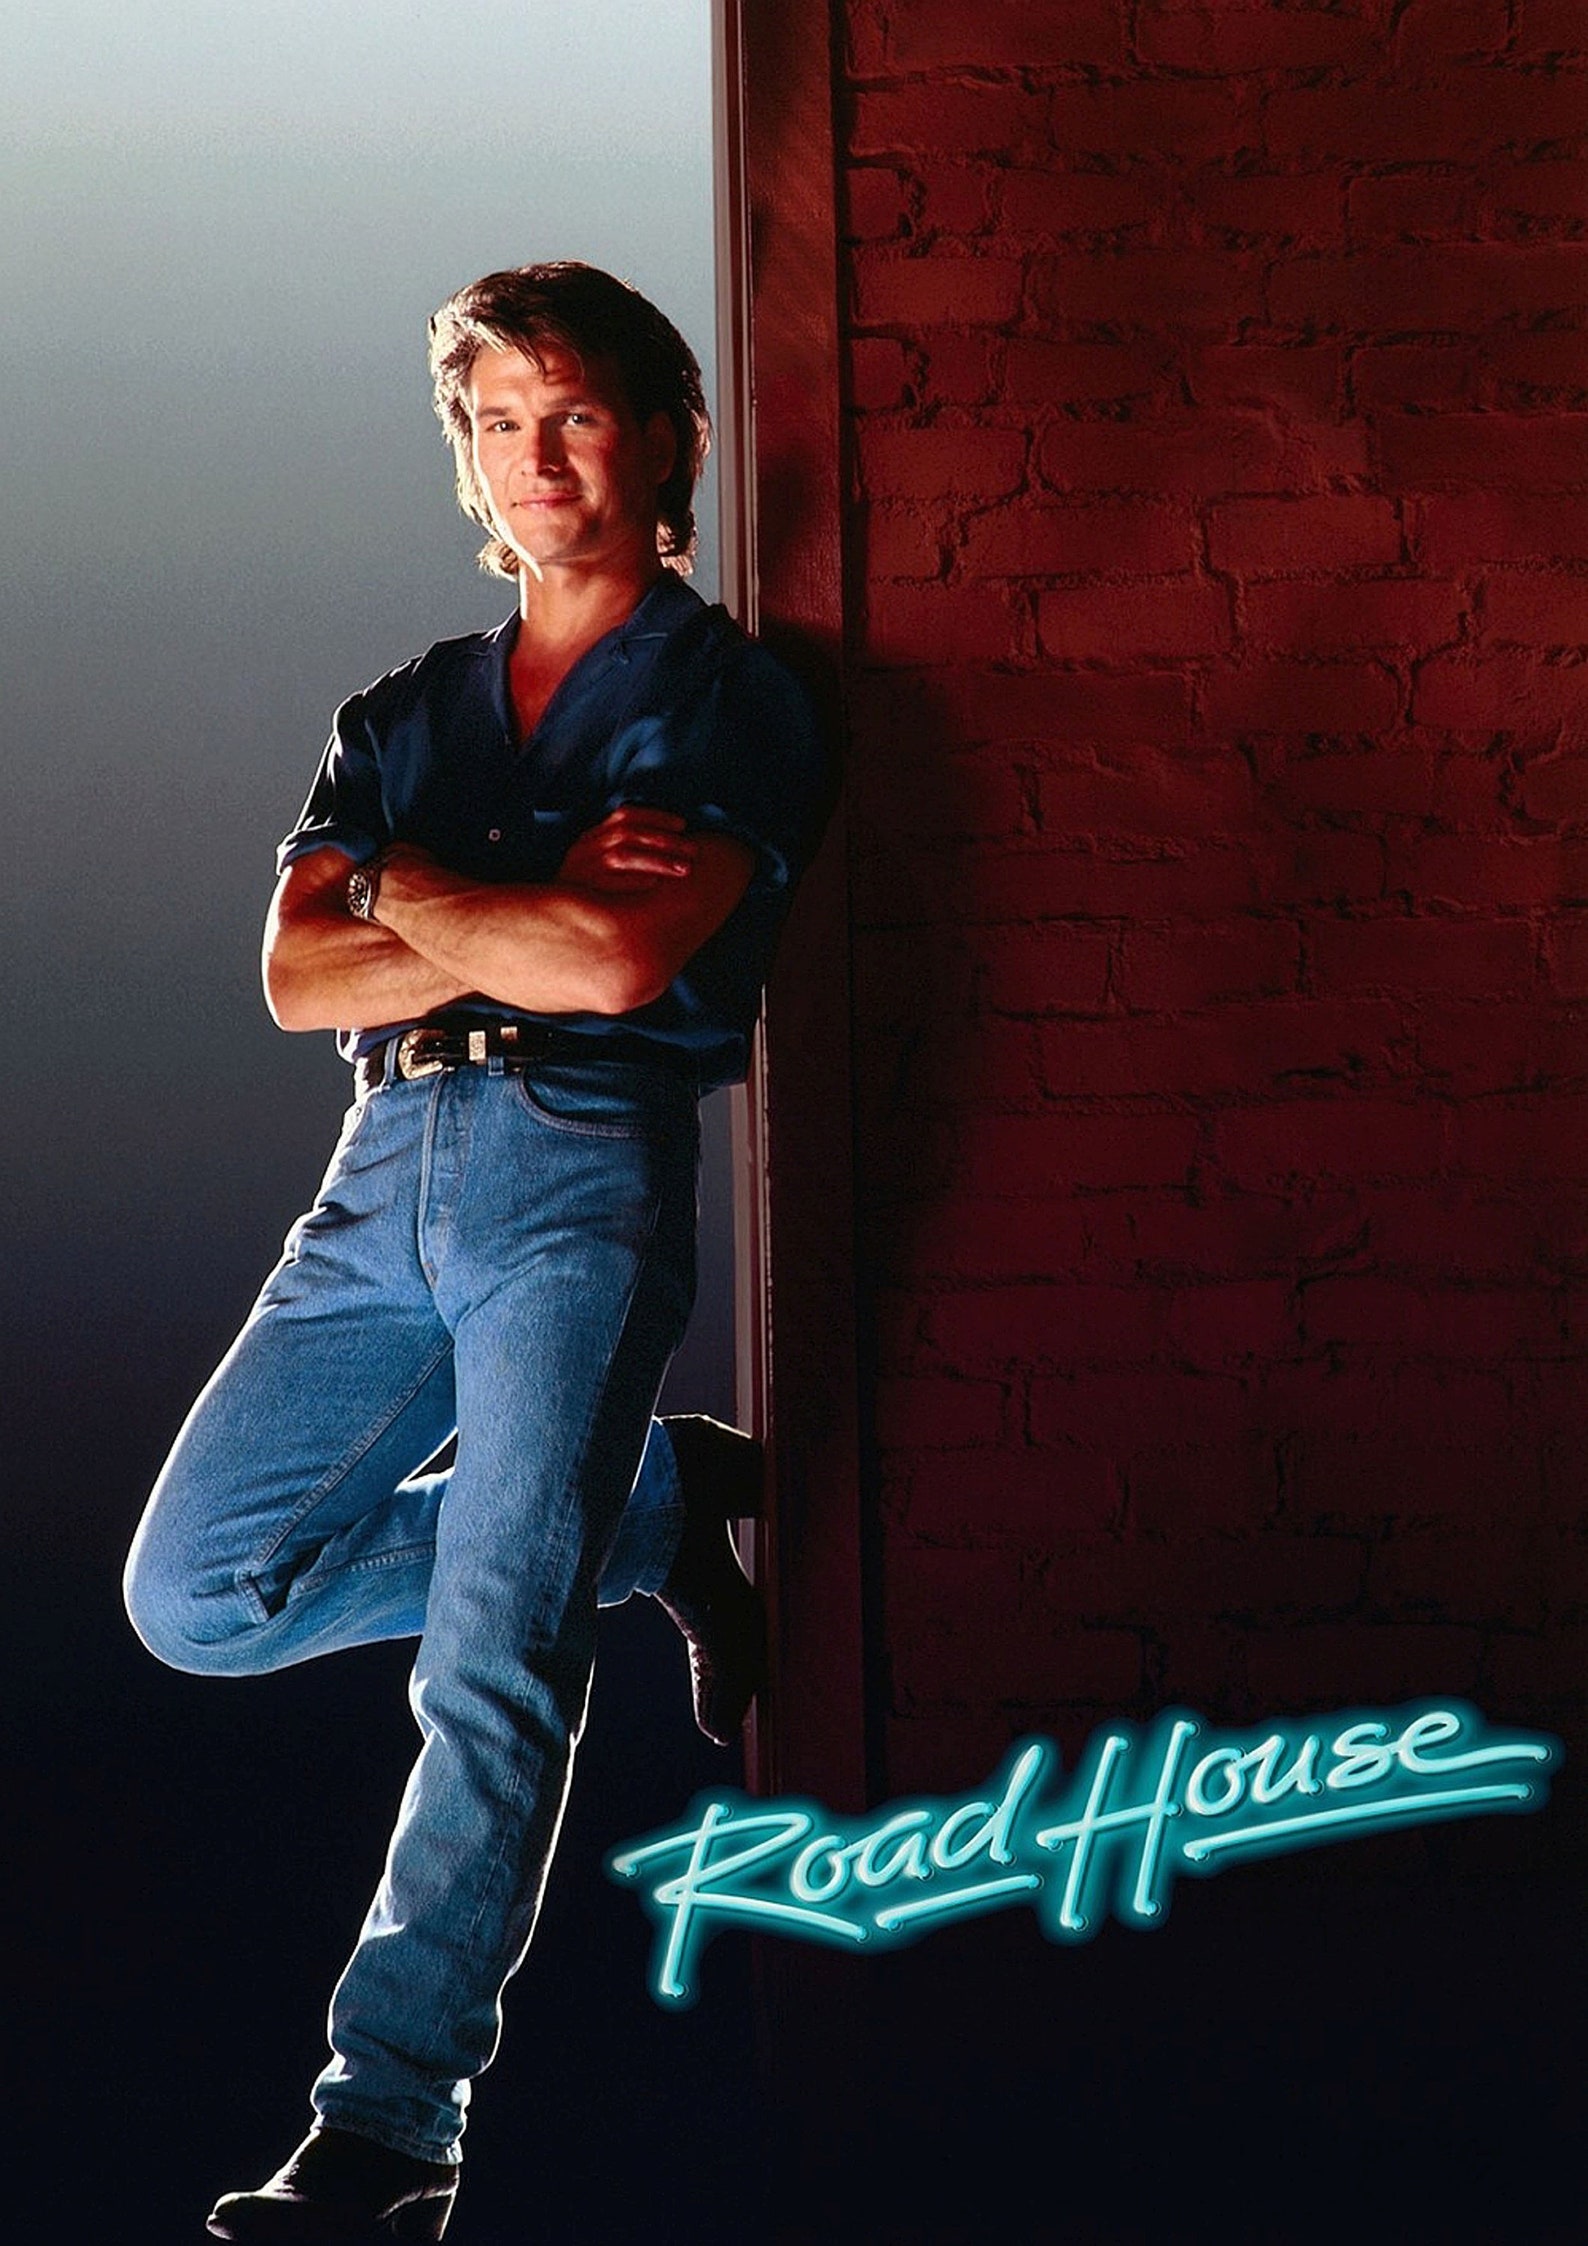 Road House 1989 Poster American Action Film Wall Decor Retro Etsy